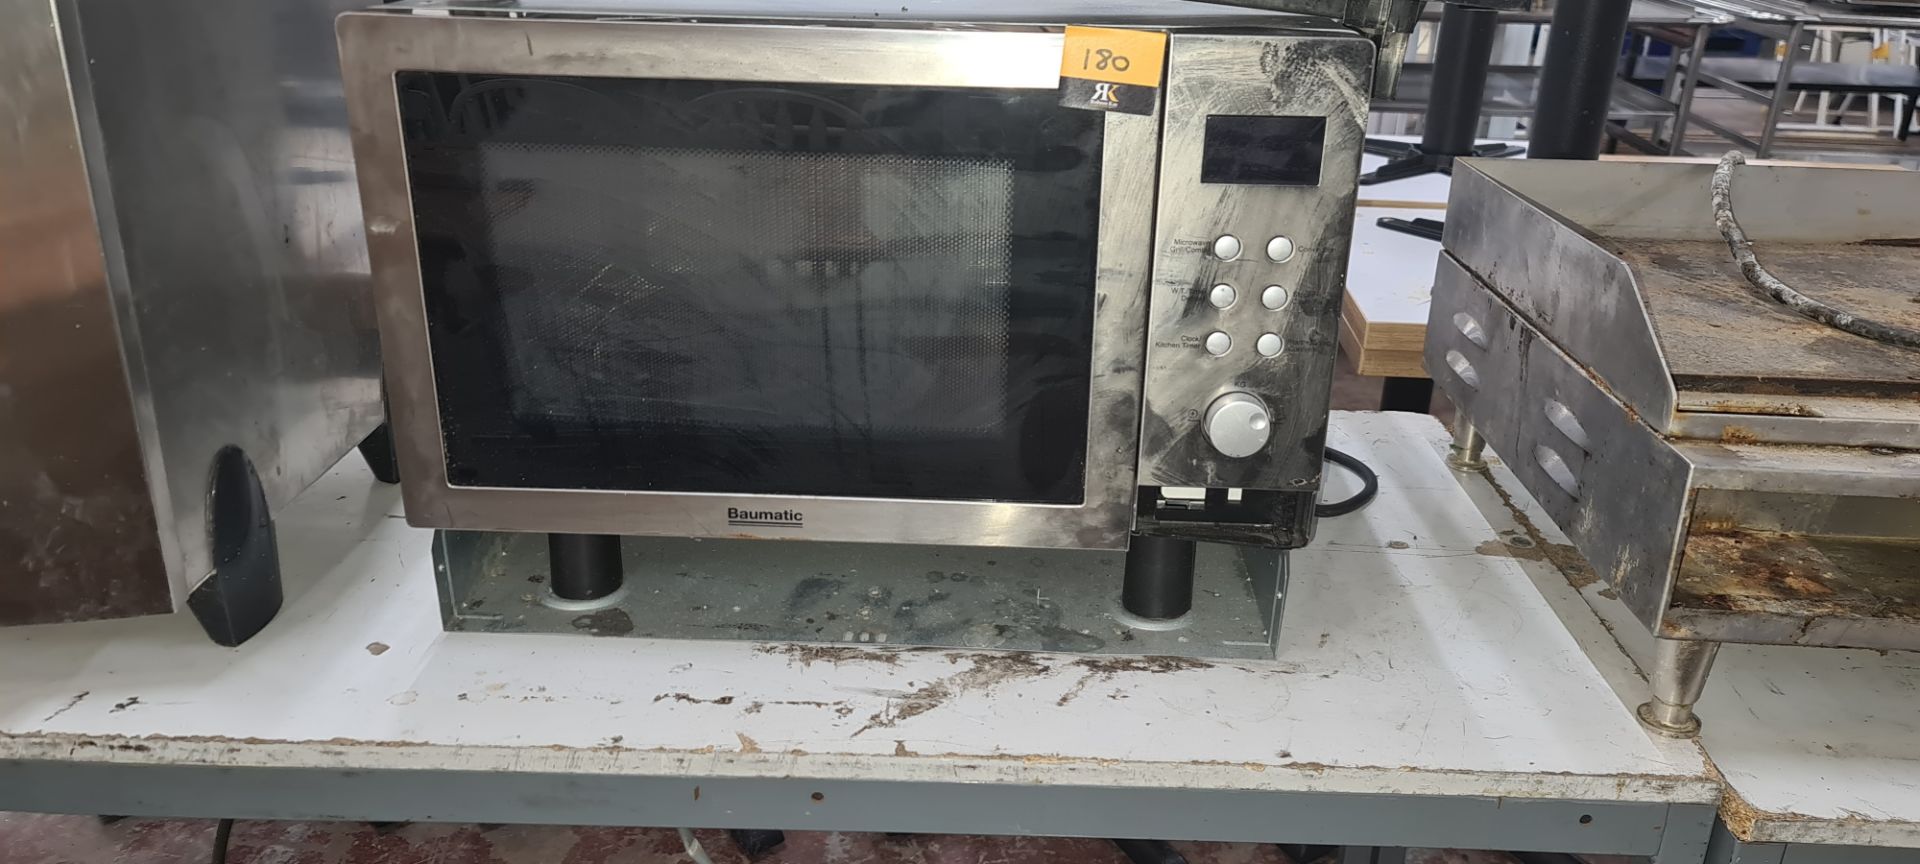 Baumatic microwave with detachable surround for integrating into cupboards NB. Damaged "Open" button - Image 4 of 4